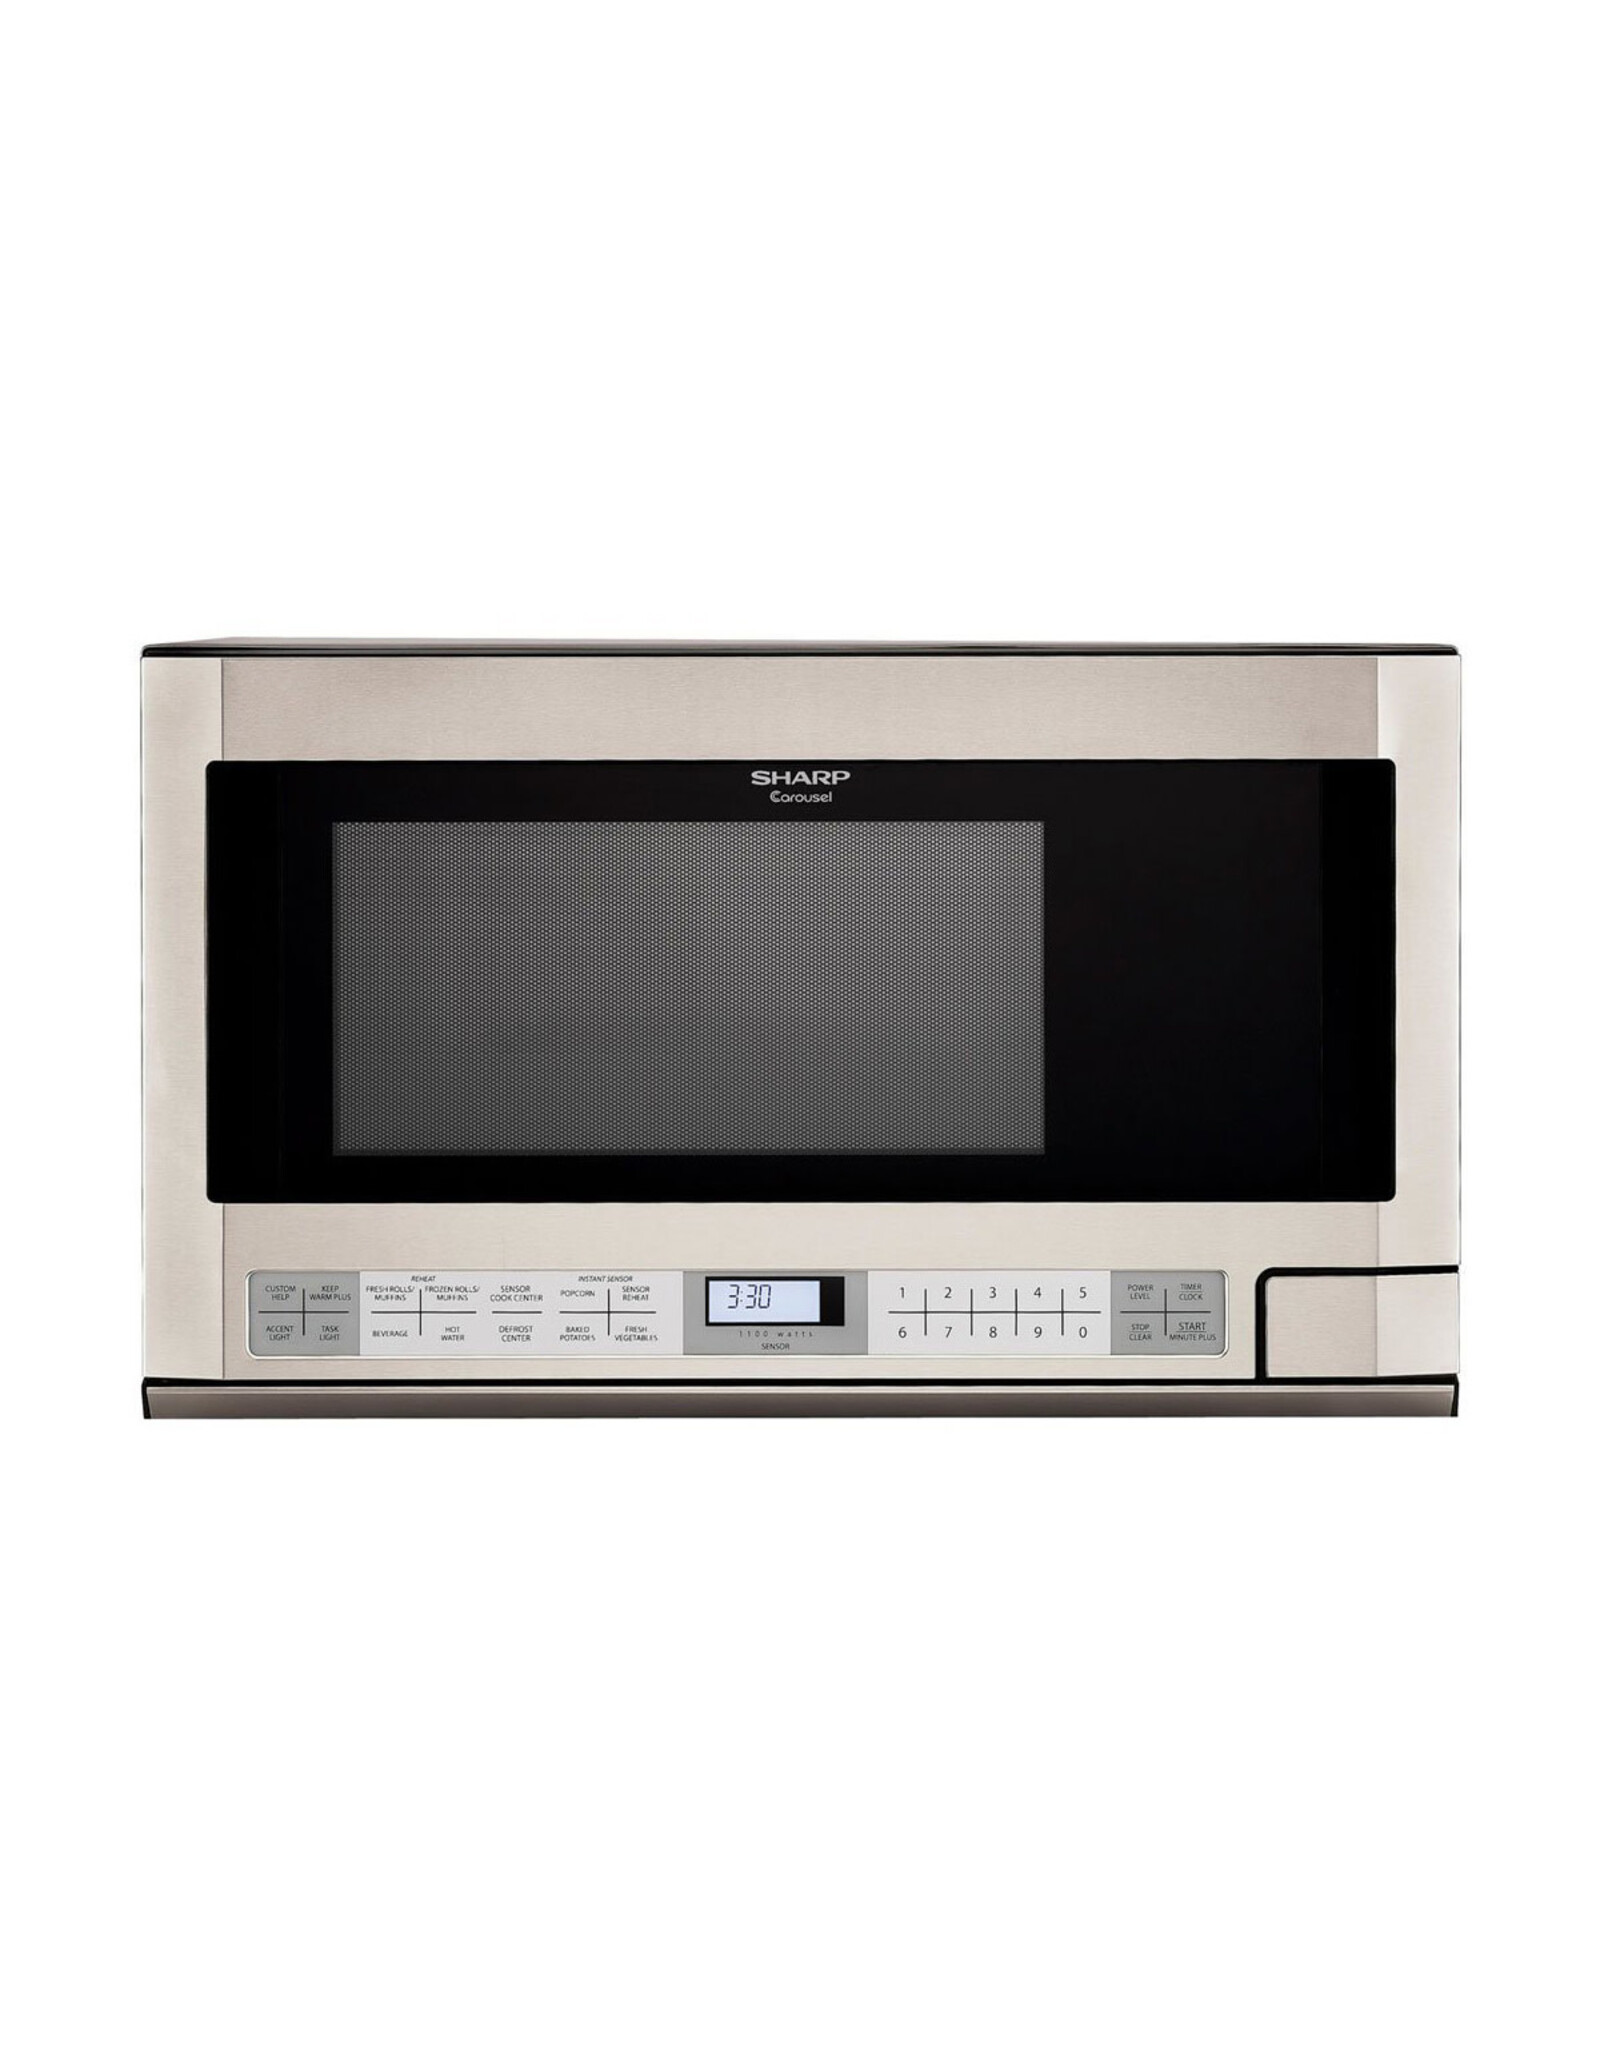 Sharp® R1214T 1.5 Cu Ft Over-The-Range Microwave, Stainless Steel Item #714218